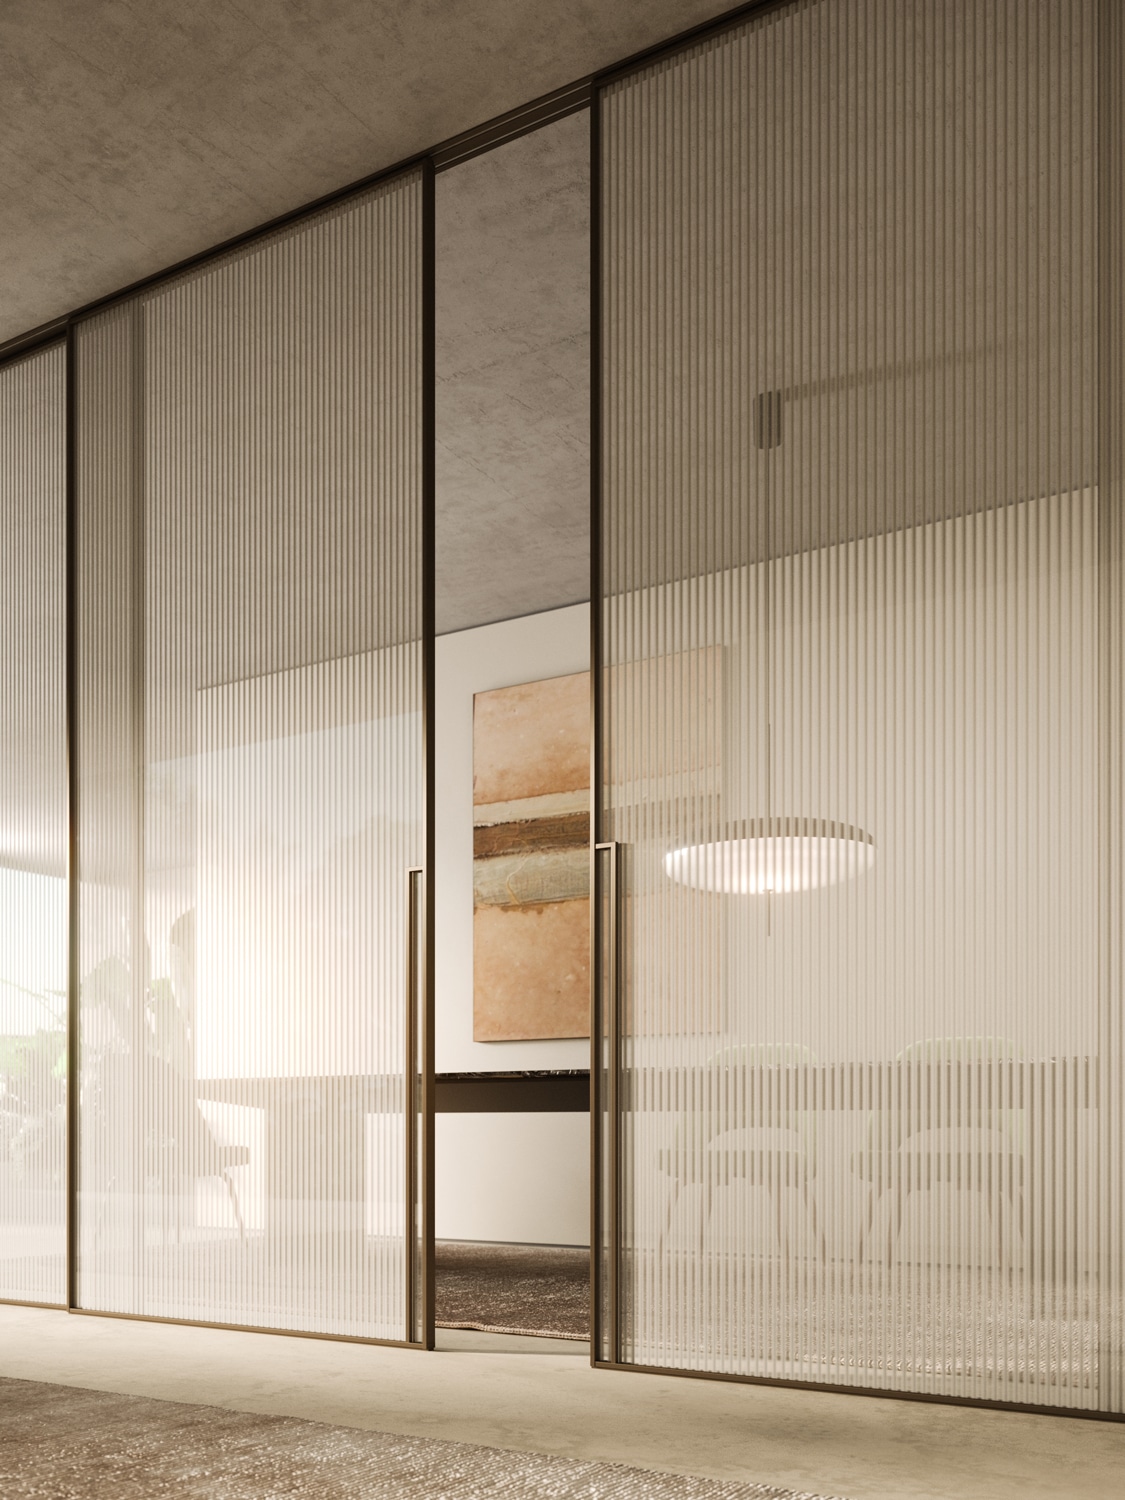 Using the synergies between glass and light, the new Canneté pattern brings an elegant visual movement to the doors that reverberates into the whole environment.